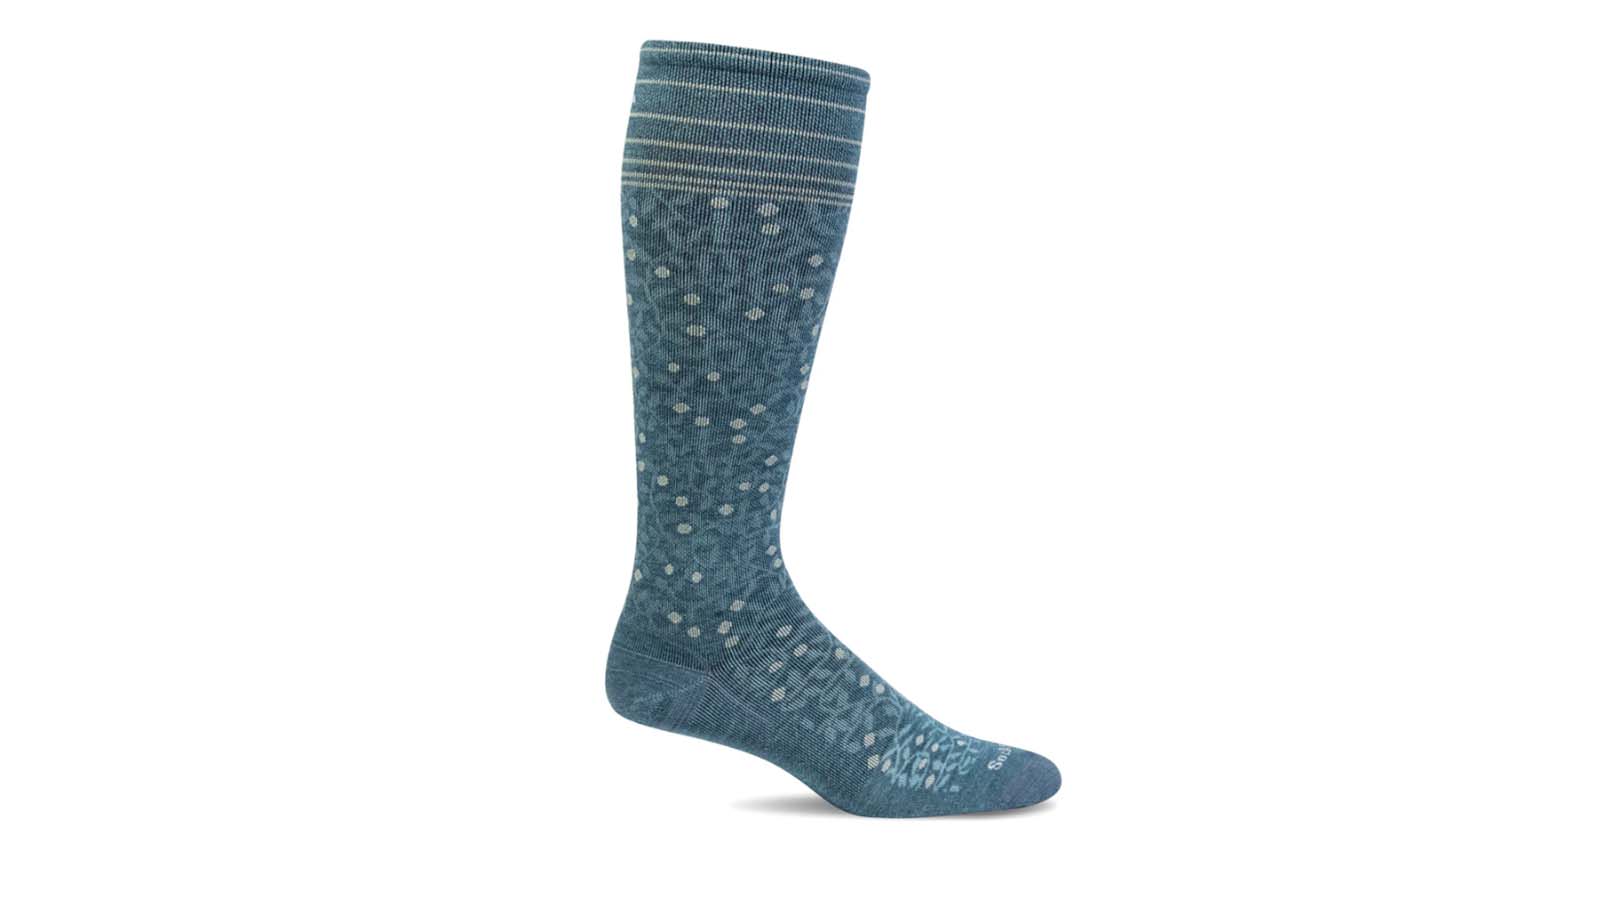 The Best Compression Socks for Air Travel - Tortuga